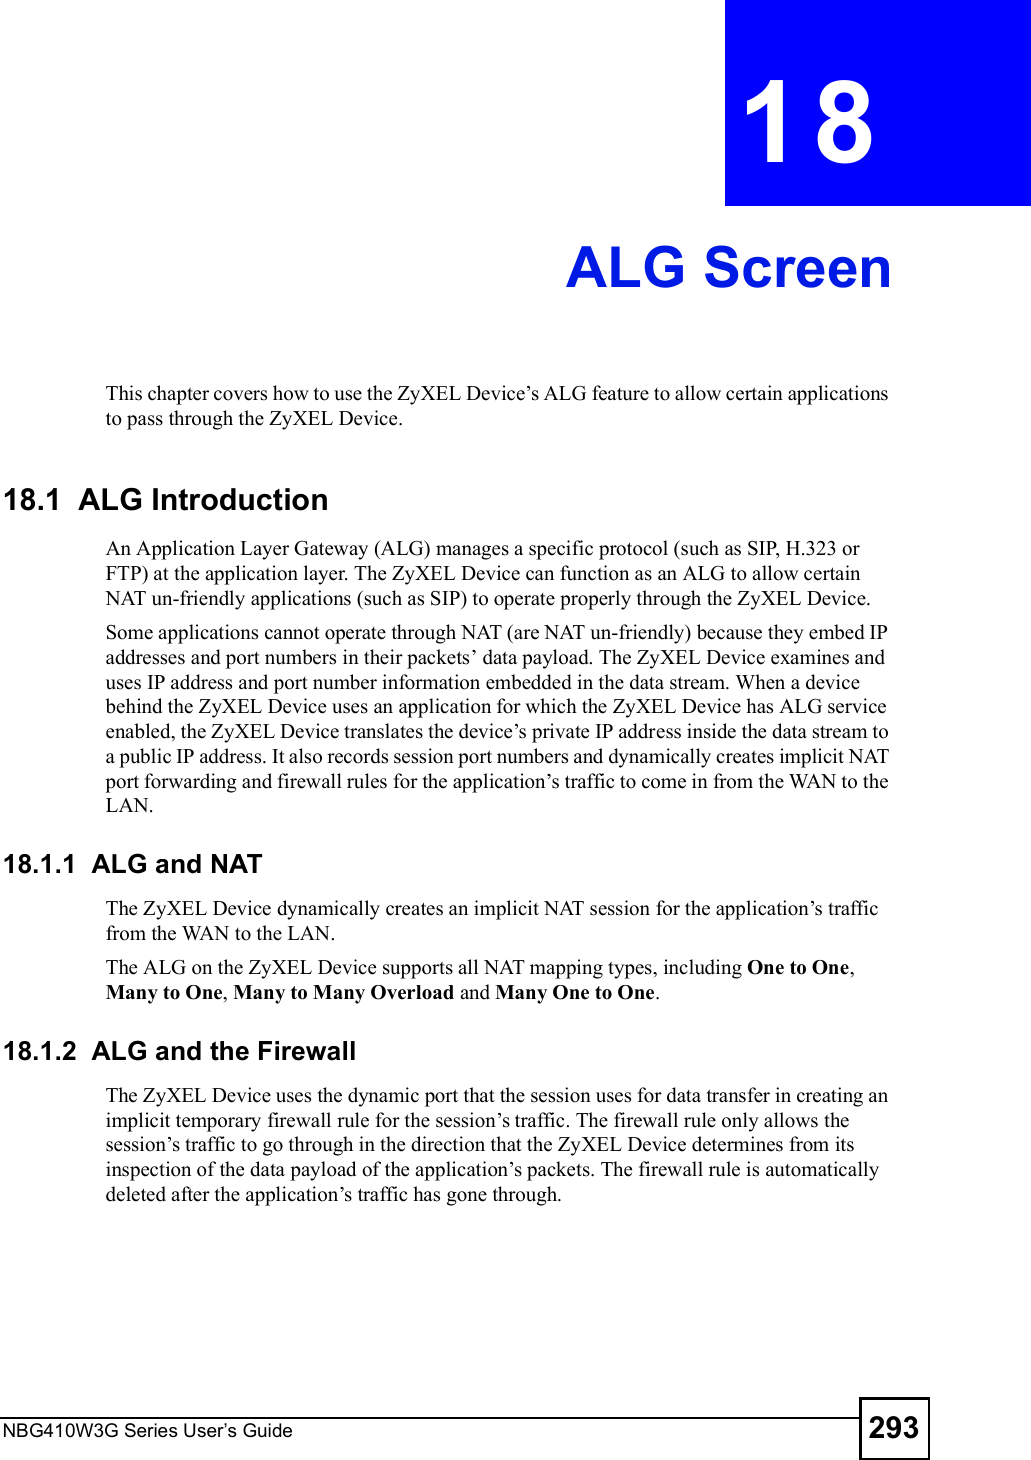 NBG410W3G Series User s Guide 293CHAPTER  18 ALG ScreenThis chapter covers how to use the ZyXEL Device!s ALG feature to allow certain applications to pass through the ZyXEL Device.18.1  ALG Introduction An Application Layer Gateway (ALG) manages a specific protocol (such as SIP, H.323 or FTP) at the application layer. The ZyXEL Device can function as an ALG to allow certain NAT un-friendly applications (such as SIP) to operate properly through the ZyXEL Device. Some applications cannot operate through NAT (are NAT un-friendly) because they embed IP addresses and port numbers in their packets! data payload. The ZyXEL Device examines and uses IP address and port number information embedded in the data stream. When a device behind the ZyXEL Device uses an application for which the ZyXEL Device has ALG service enabled, the ZyXEL Device translates the device!s private IP address inside the data stream to a public IP address. It also records session port numbers and dynamically creates implicit NAT port forwarding and firewall rules for the application!s traffic to come in from the WAN to the LAN. 18.1.1  ALG and NATThe ZyXEL Device dynamically creates an implicit NAT session for the application!s traffic from the WAN to the LAN.The ALG on the ZyXEL Device supports all NAT mapping types, including One to One, Many to One, Many to Many Overload and Many One to One.18.1.2  ALG and the FirewallThe ZyXEL Device uses the dynamic port that the session uses for data transfer in creating an implicit temporary firewall rule for the session!s traffic. The firewall rule only allows the session!s traffic to go through in the direction that the ZyXEL Device determines from its inspection of the data payload of the application!s packets. The firewall rule is automatically deleted after the application!s traffic has gone through.